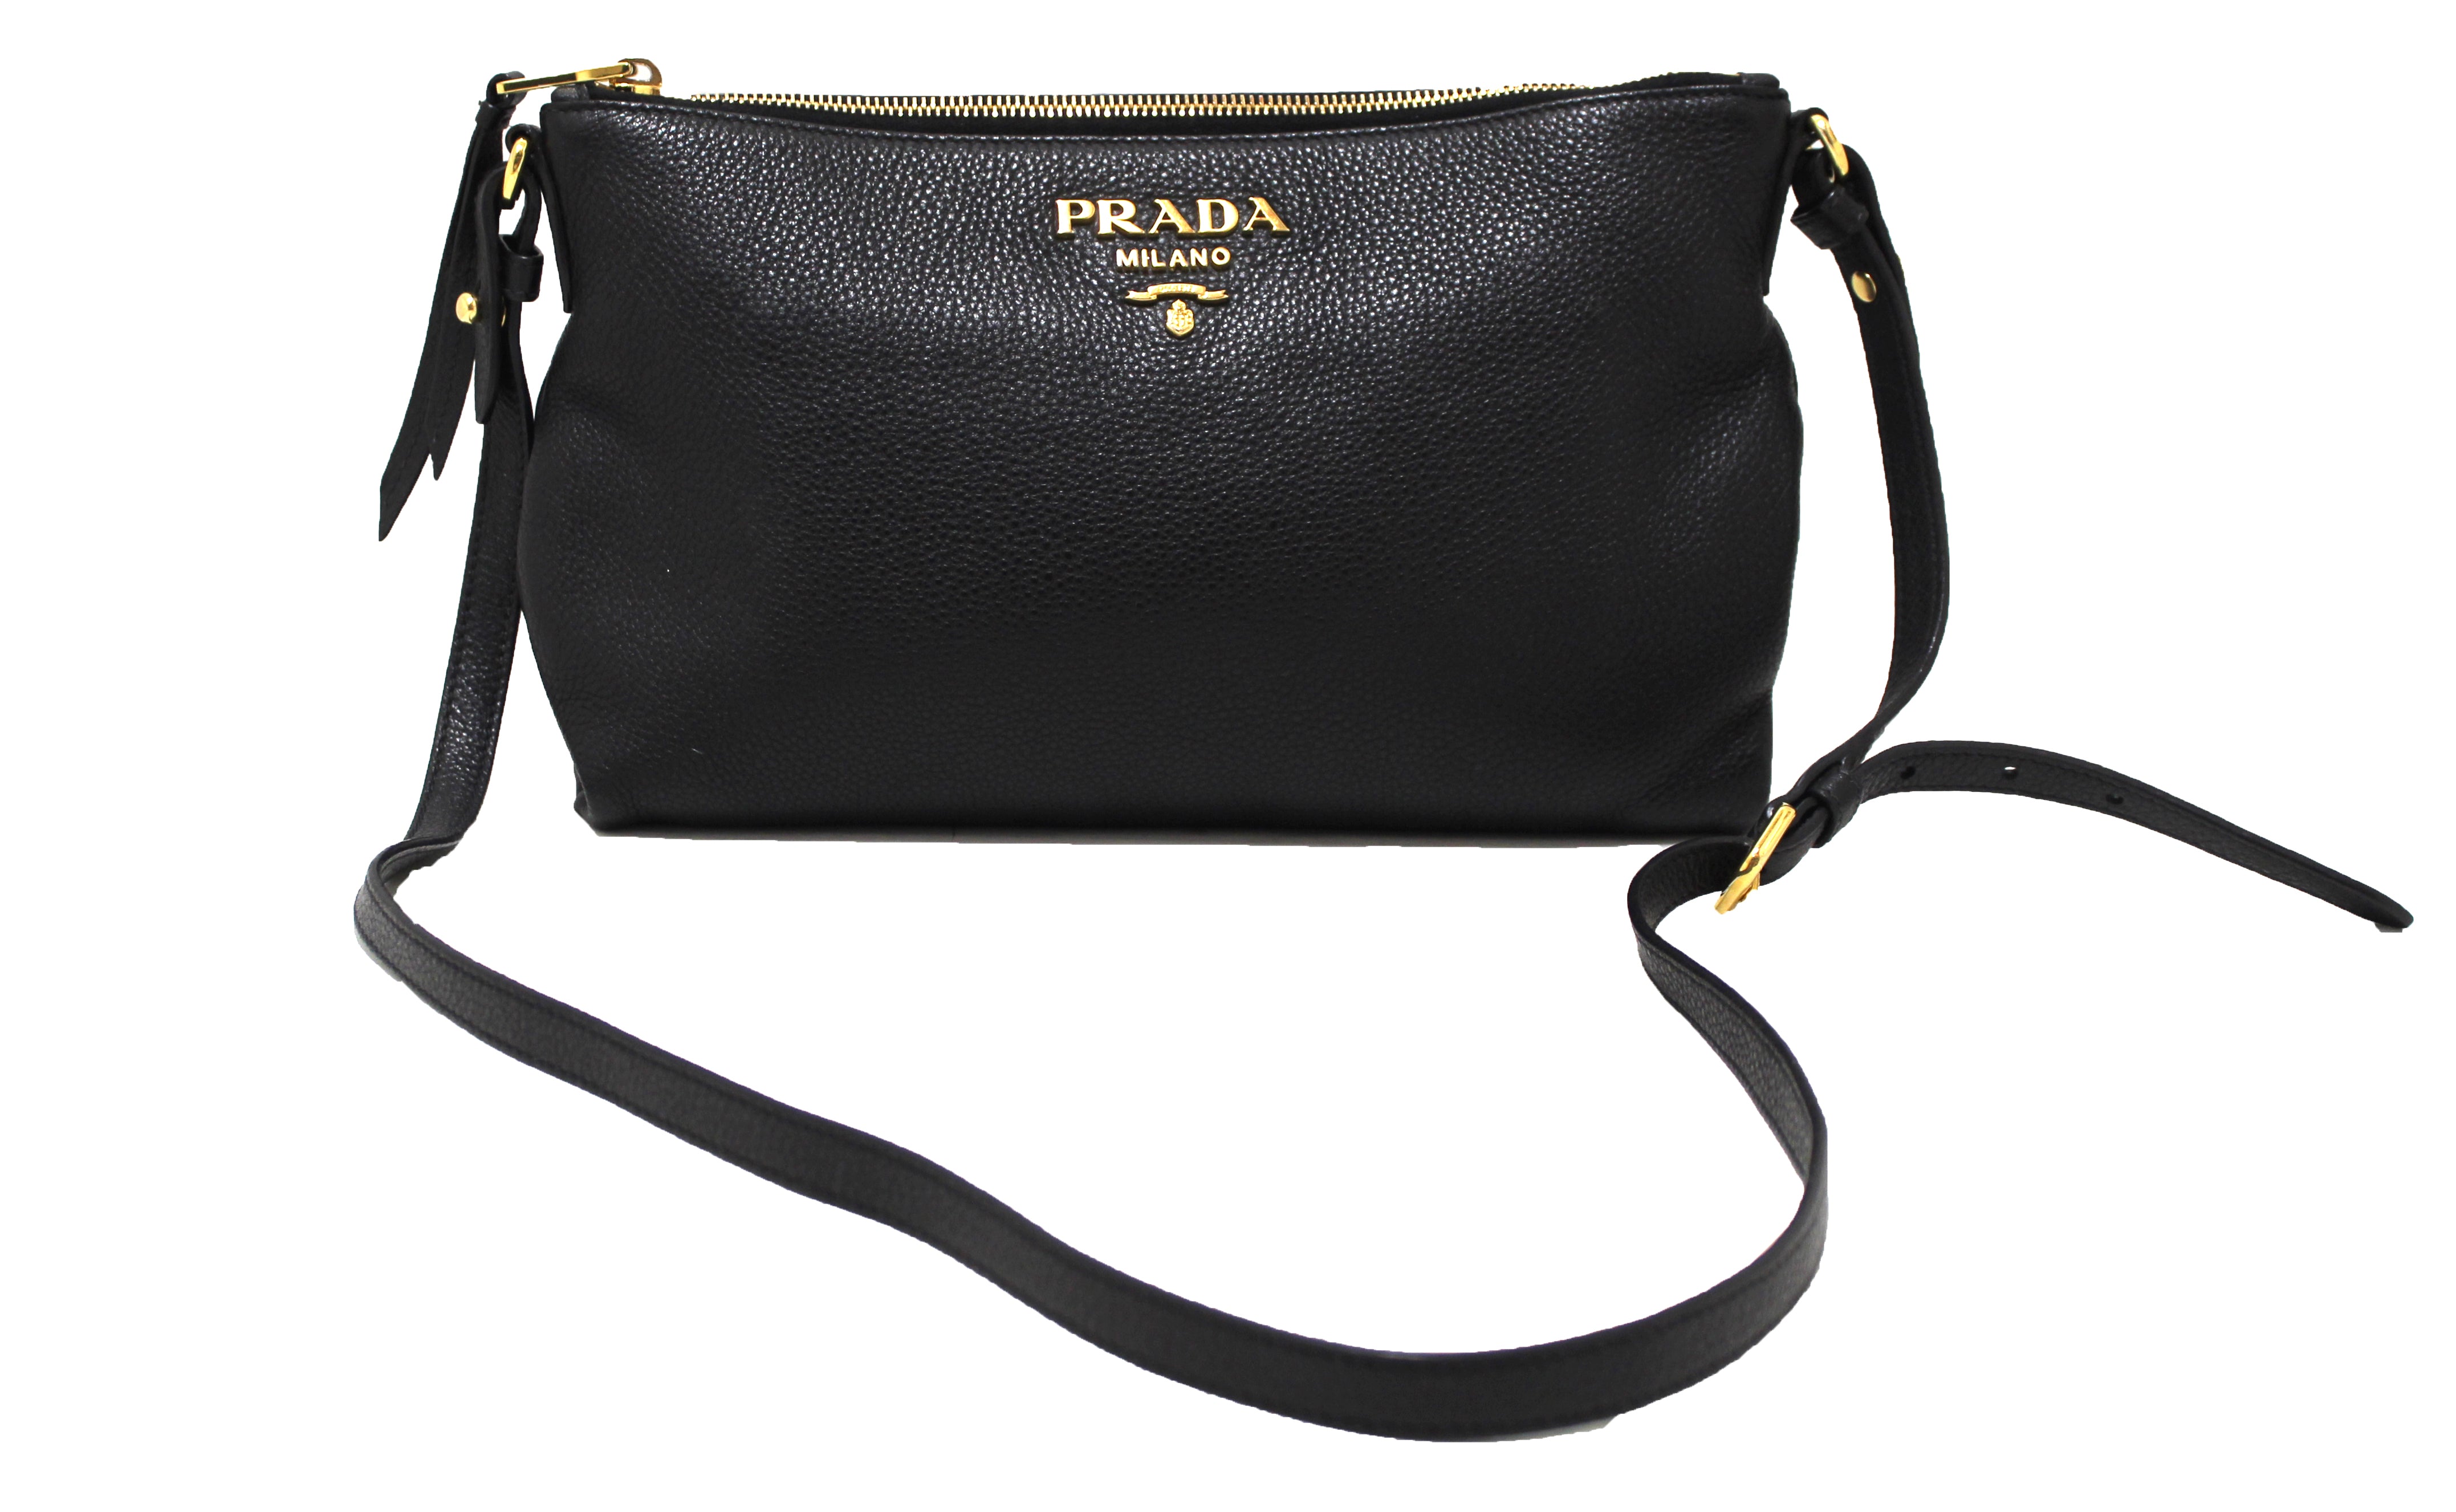 Authentic Prada Black Calfskin Leather With Double Shoulder Bag